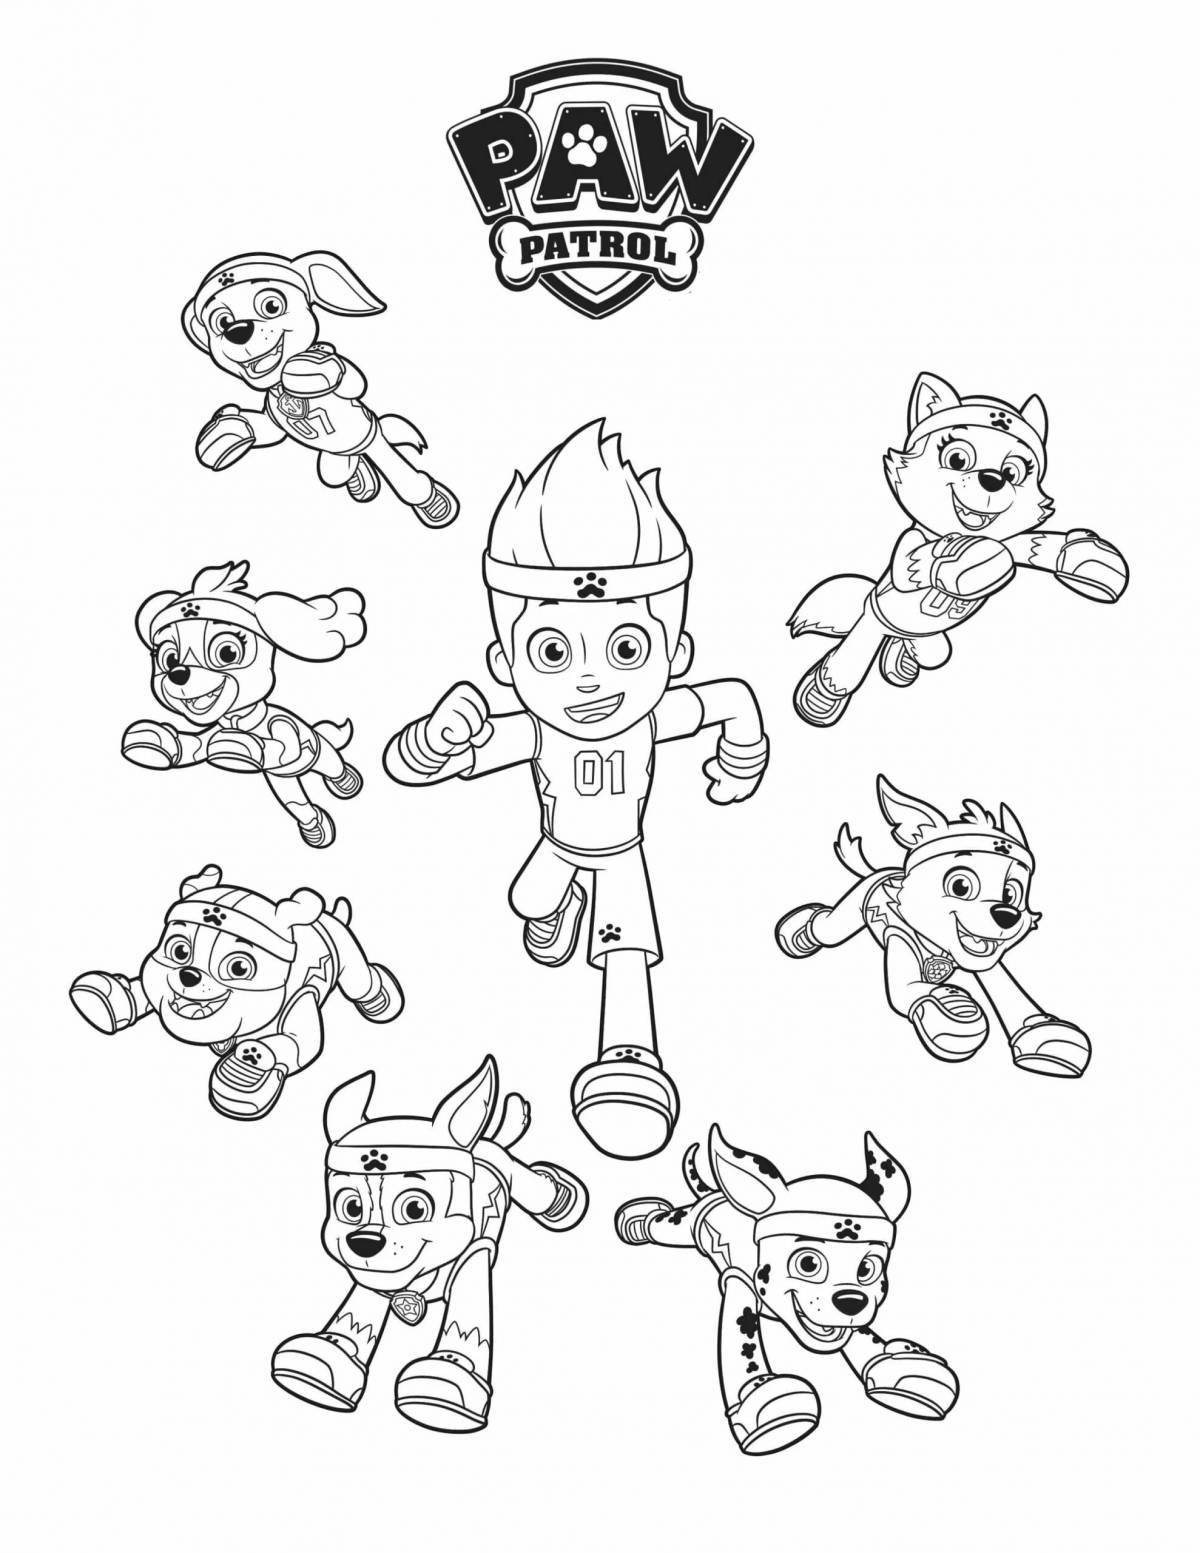 Great paw patrol coloring page